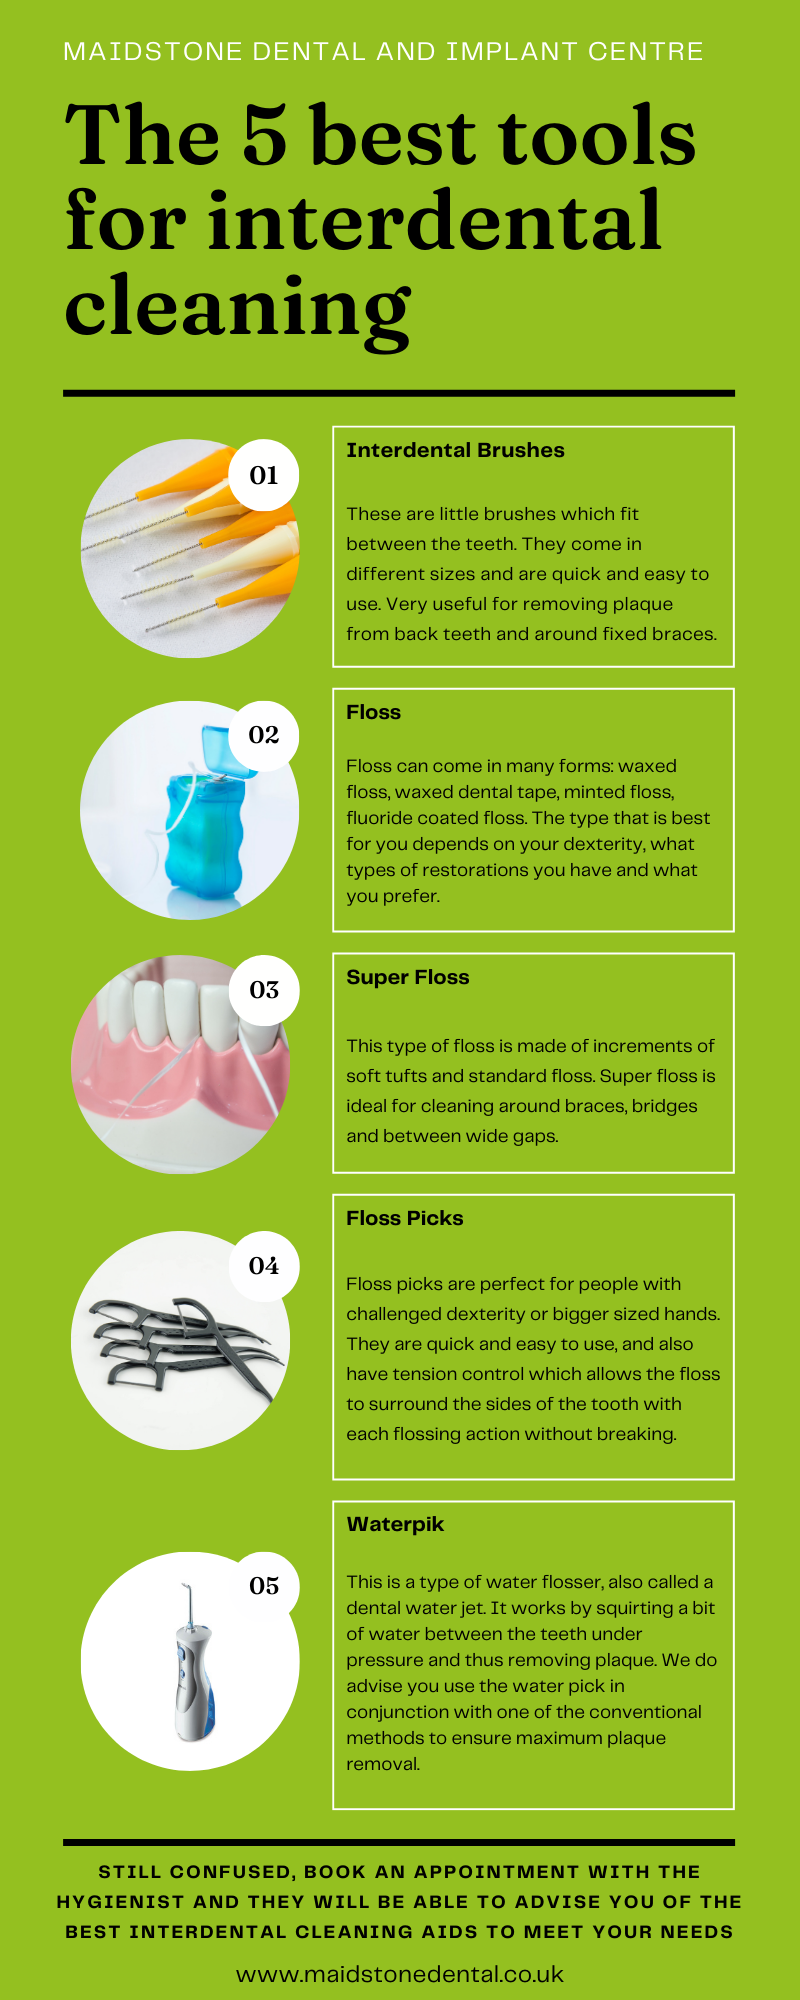 Maidstone Interdental Cleaning Infographic